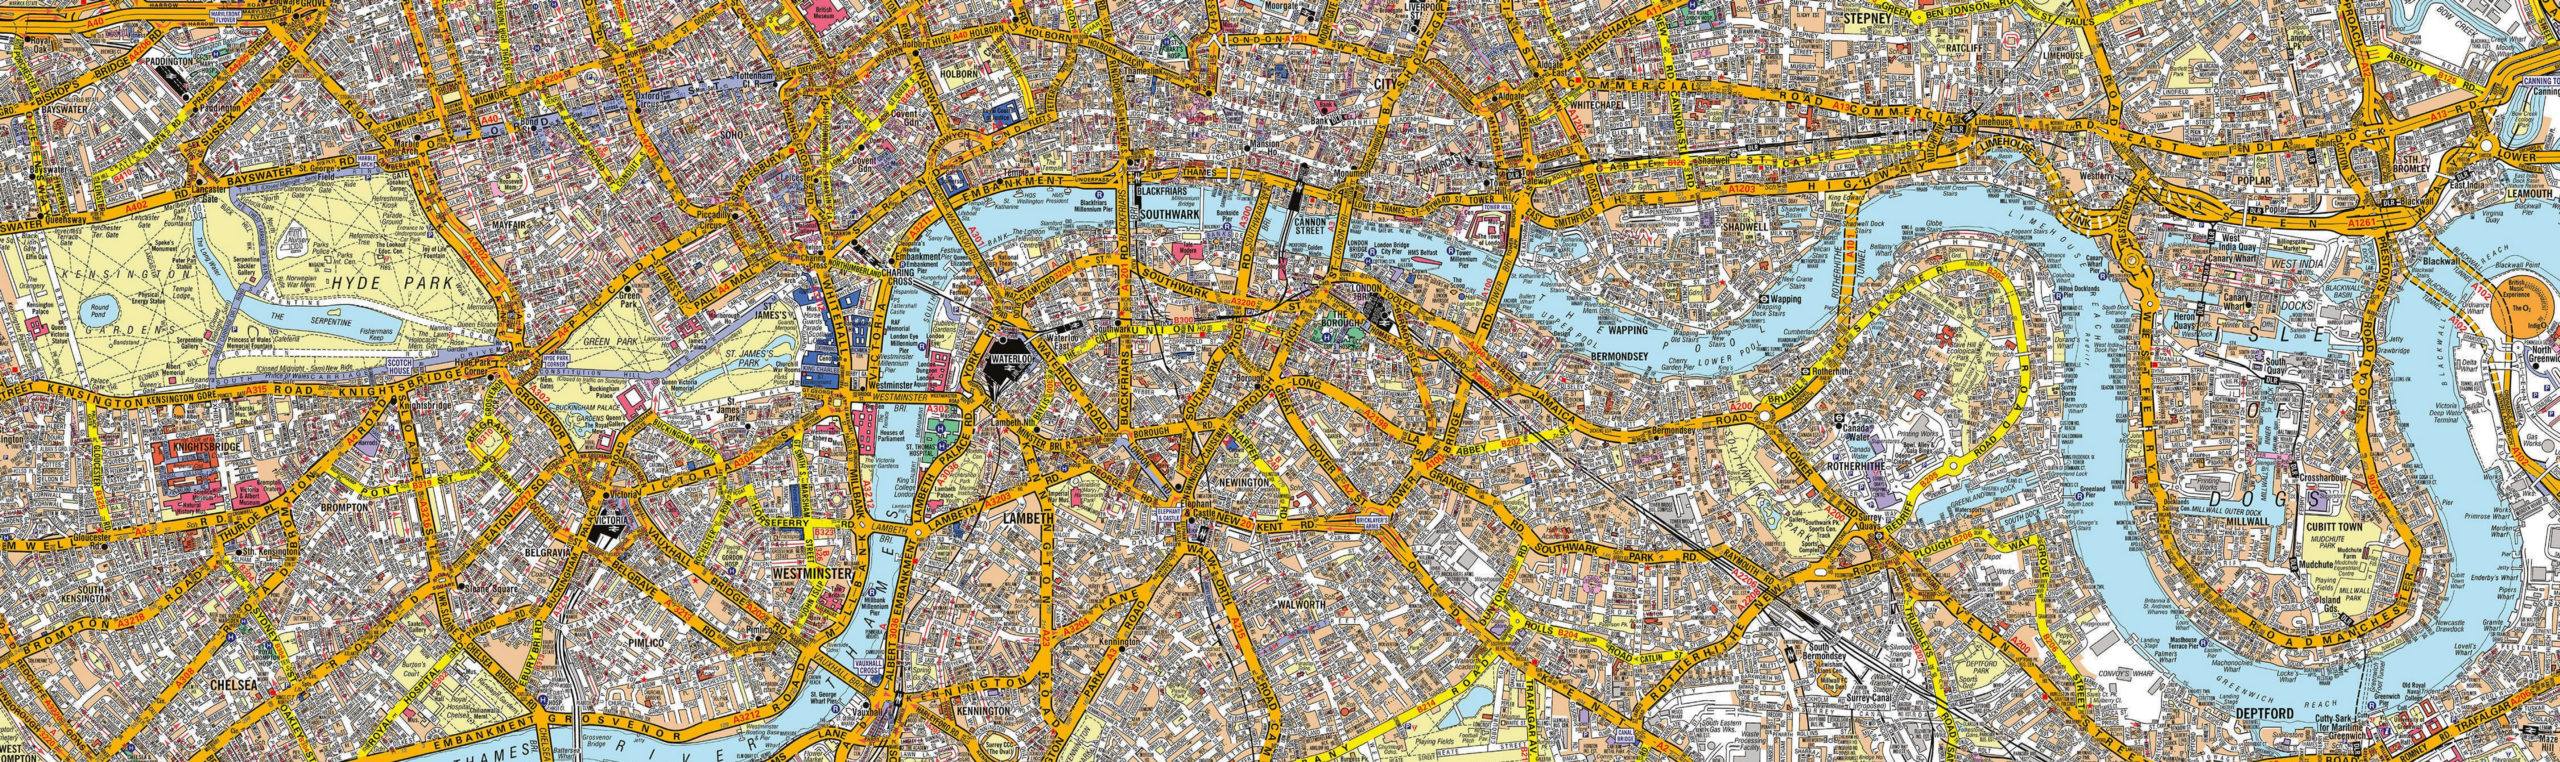 A slice of a A-Z roadmap of London, showing the Thames running through London